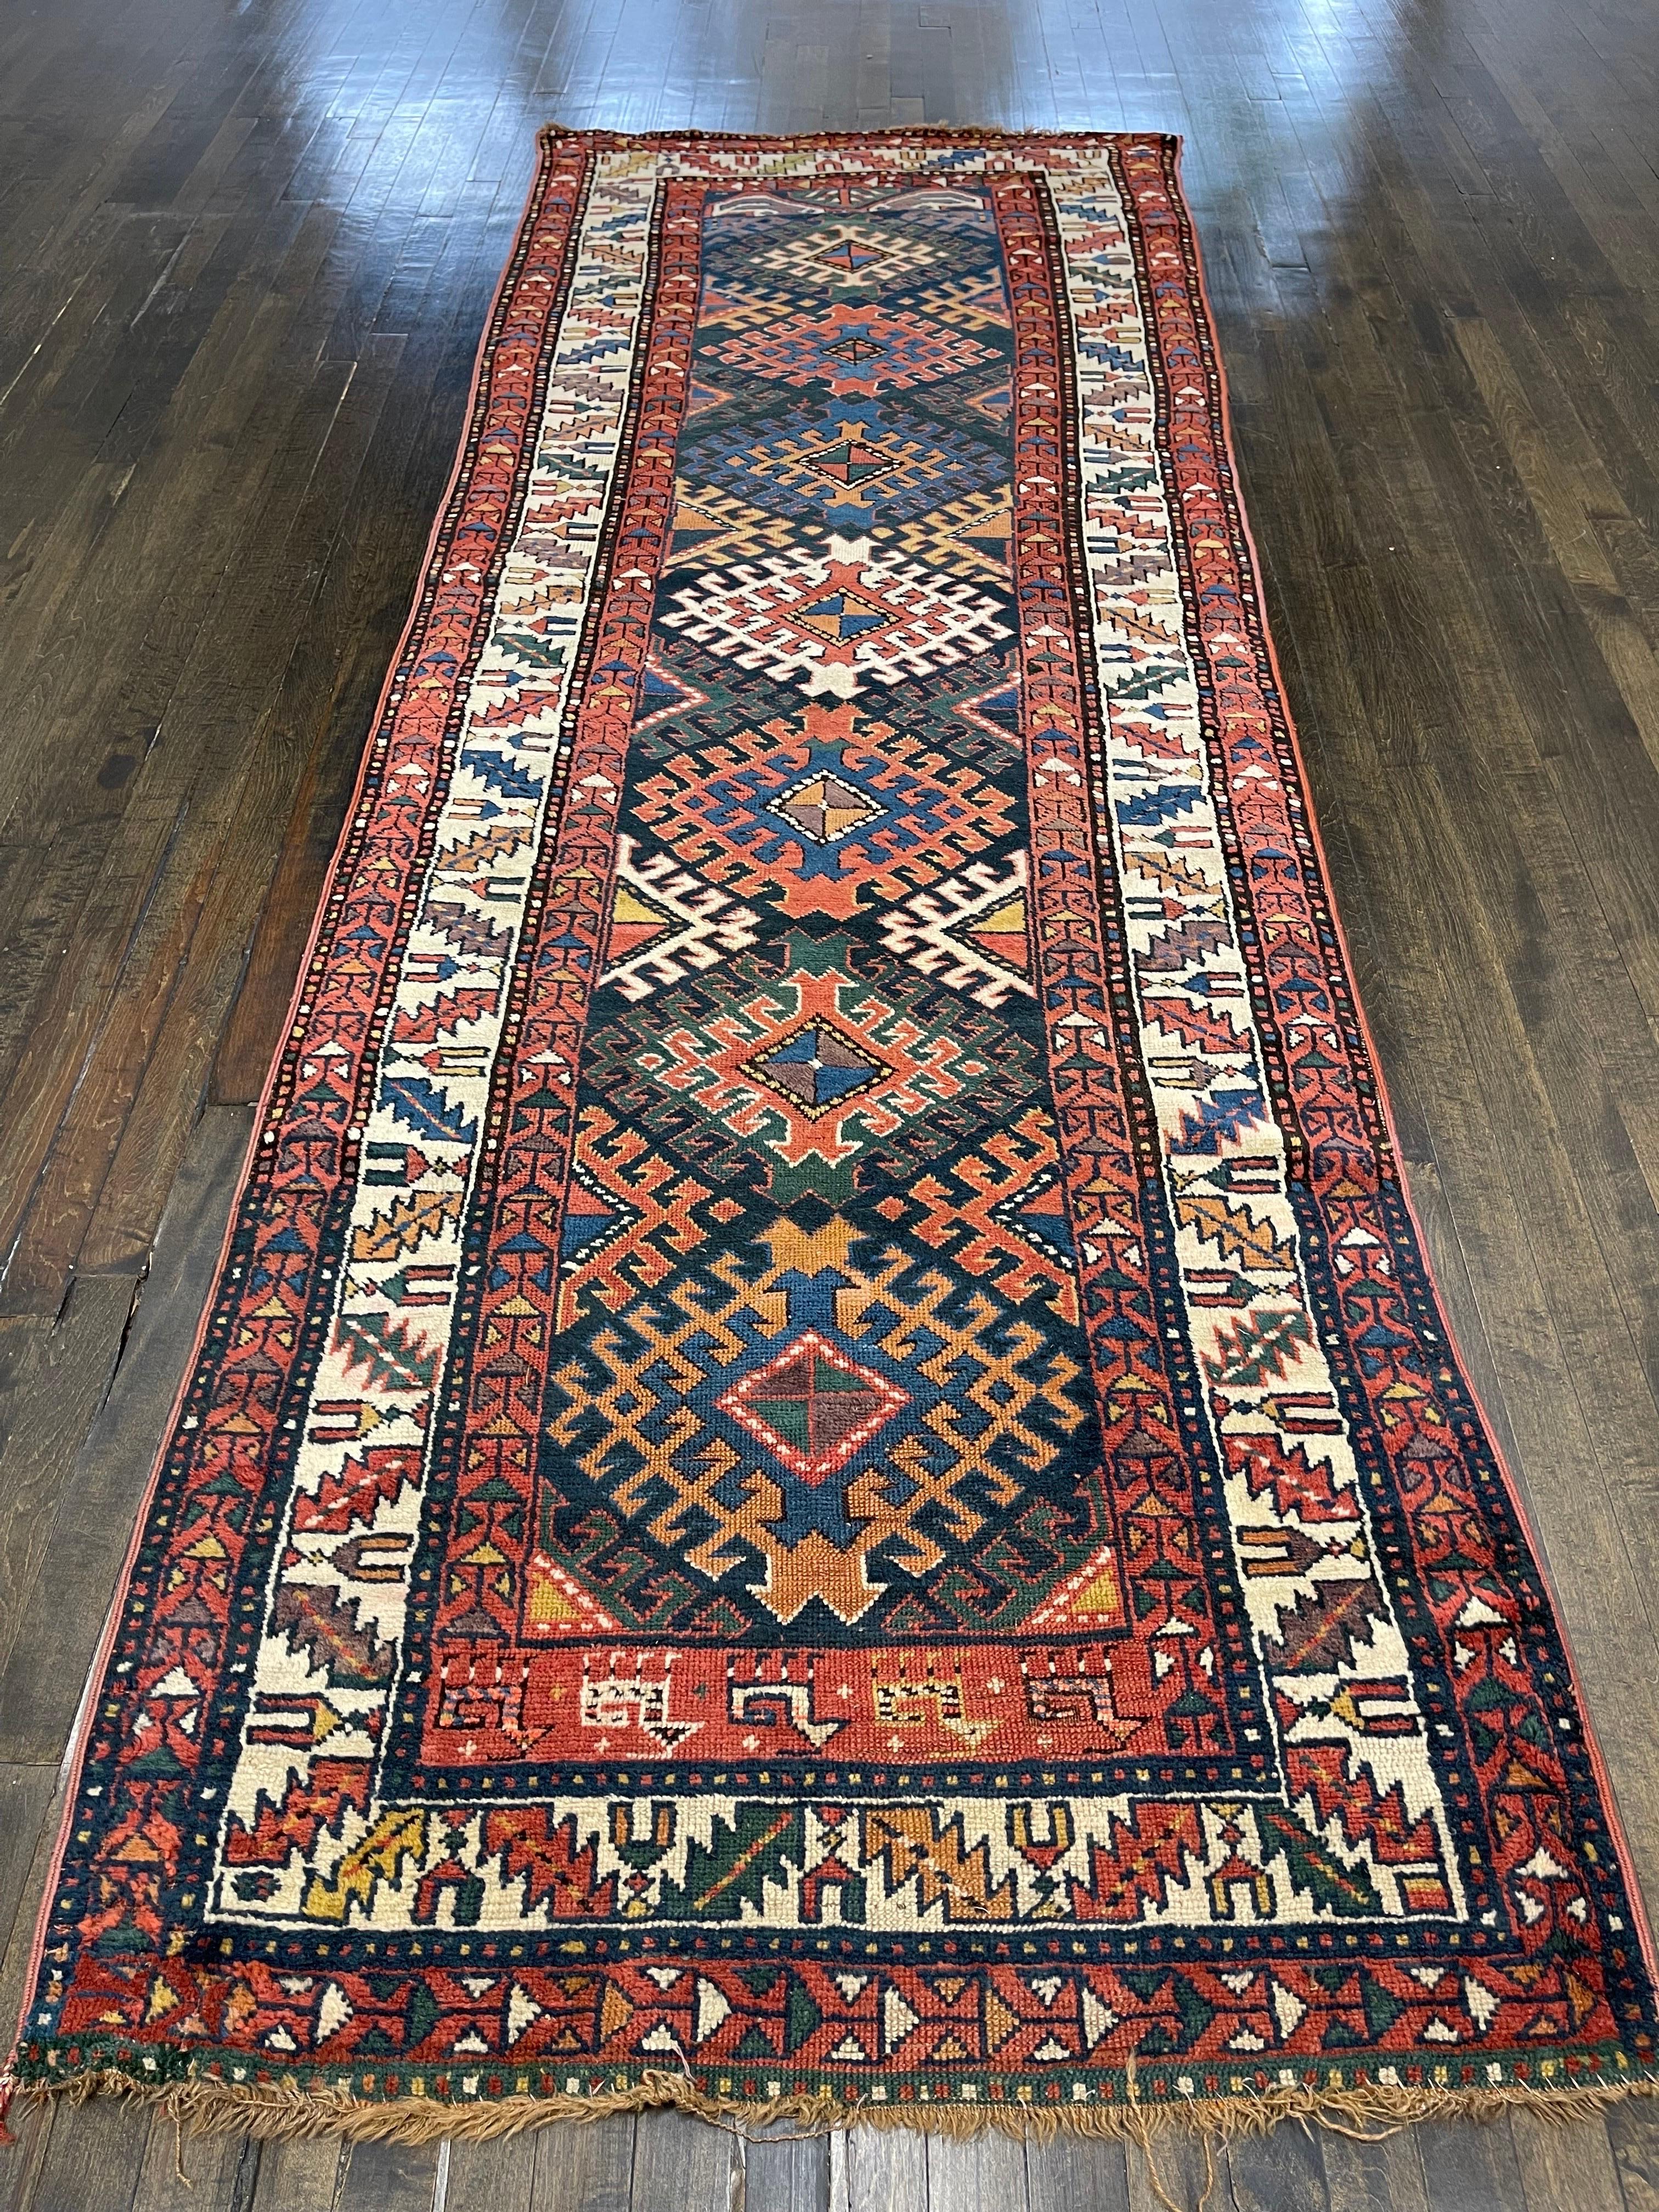 A beautiful caucasian Kazak this rug is decorated with seven solar Gul medallions with various shades of colors among them red, yellow, blue, light and dark green, apricot, lilac light and medium brown all sitting on a dark blue field. Five figures